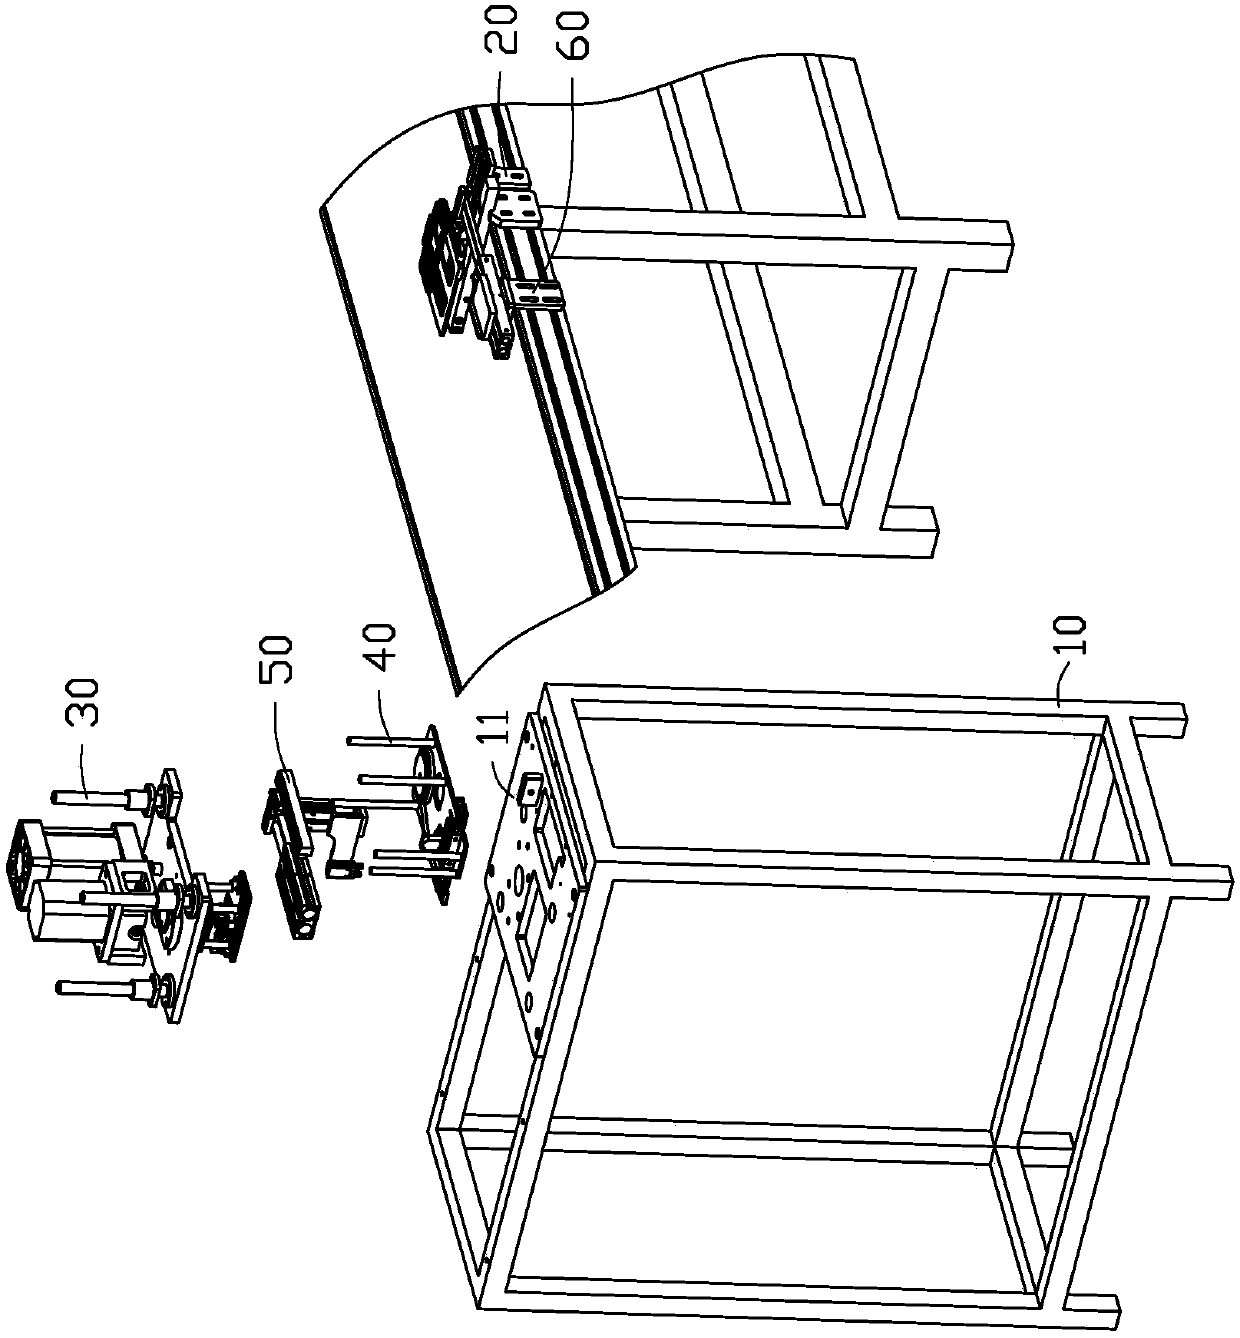 Automatic tape pasting device